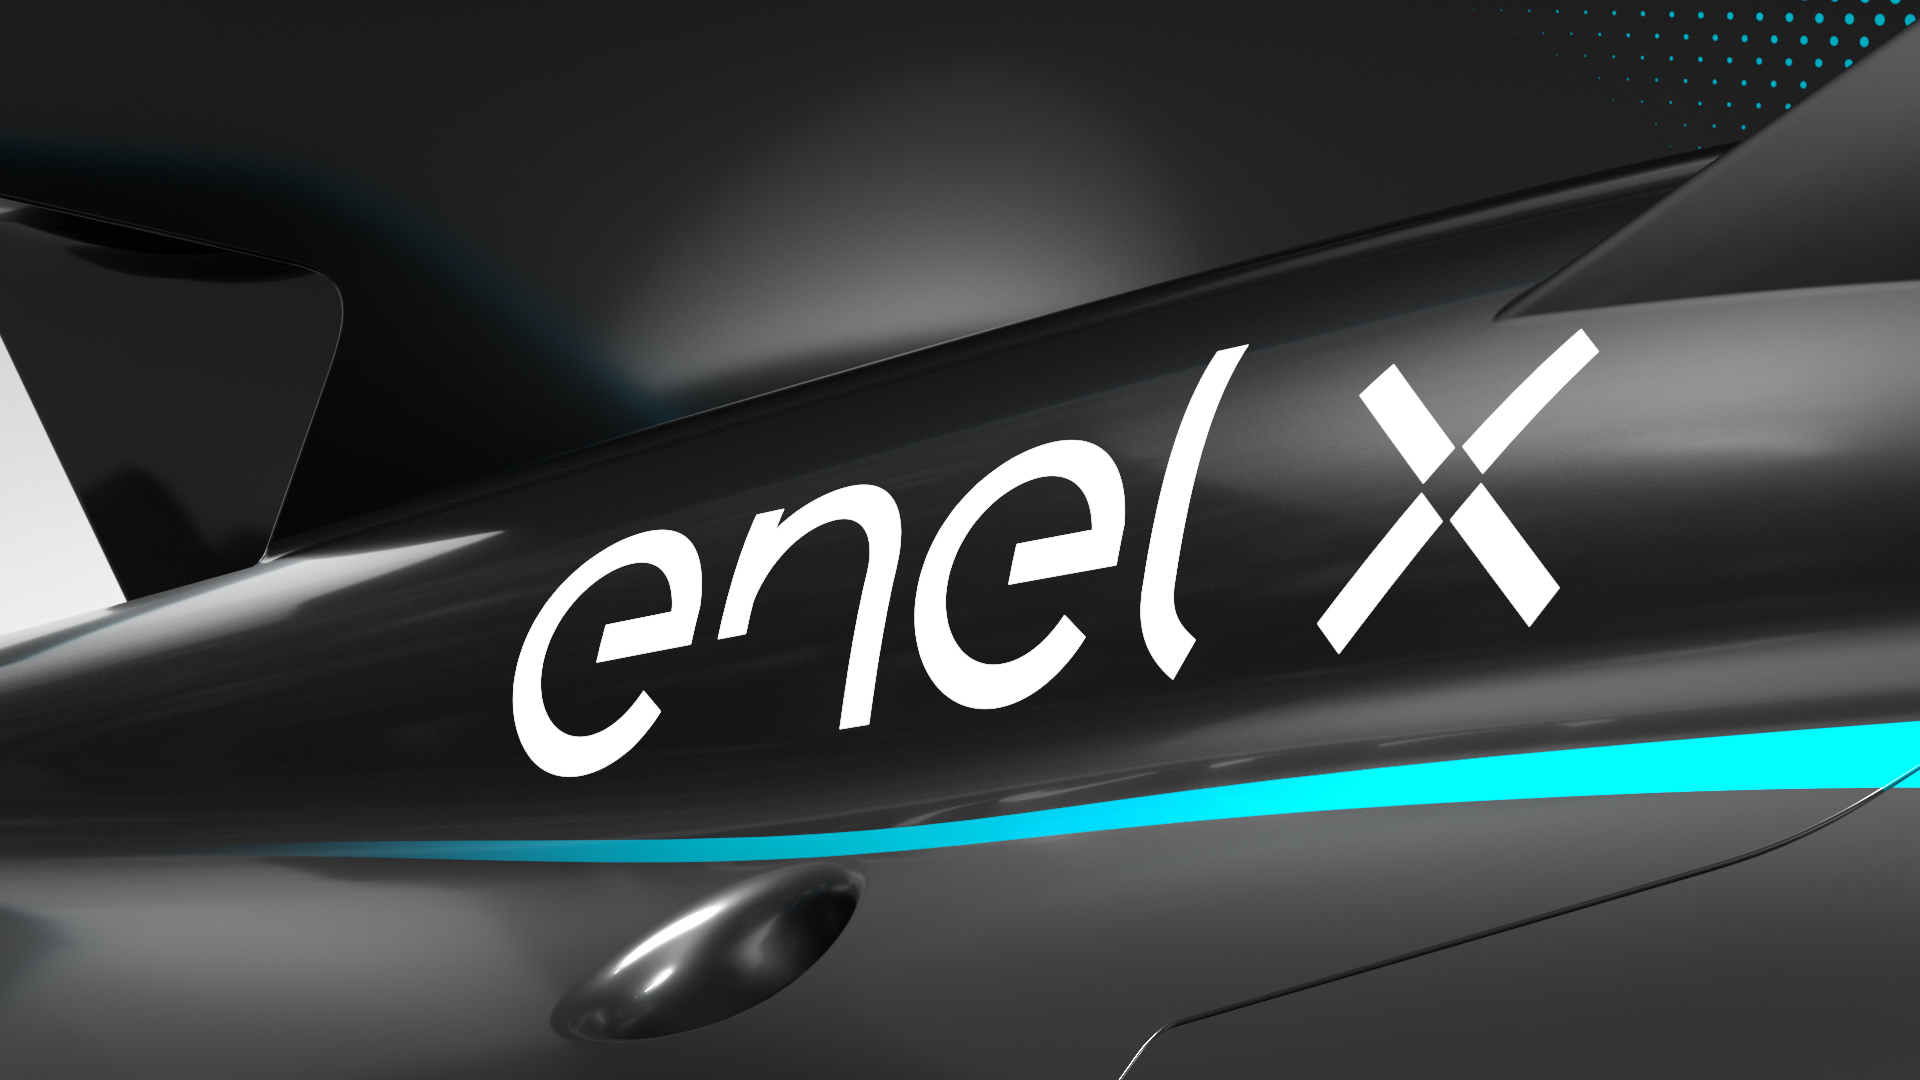 Enel X on X: Looking forward to bringing our technology and